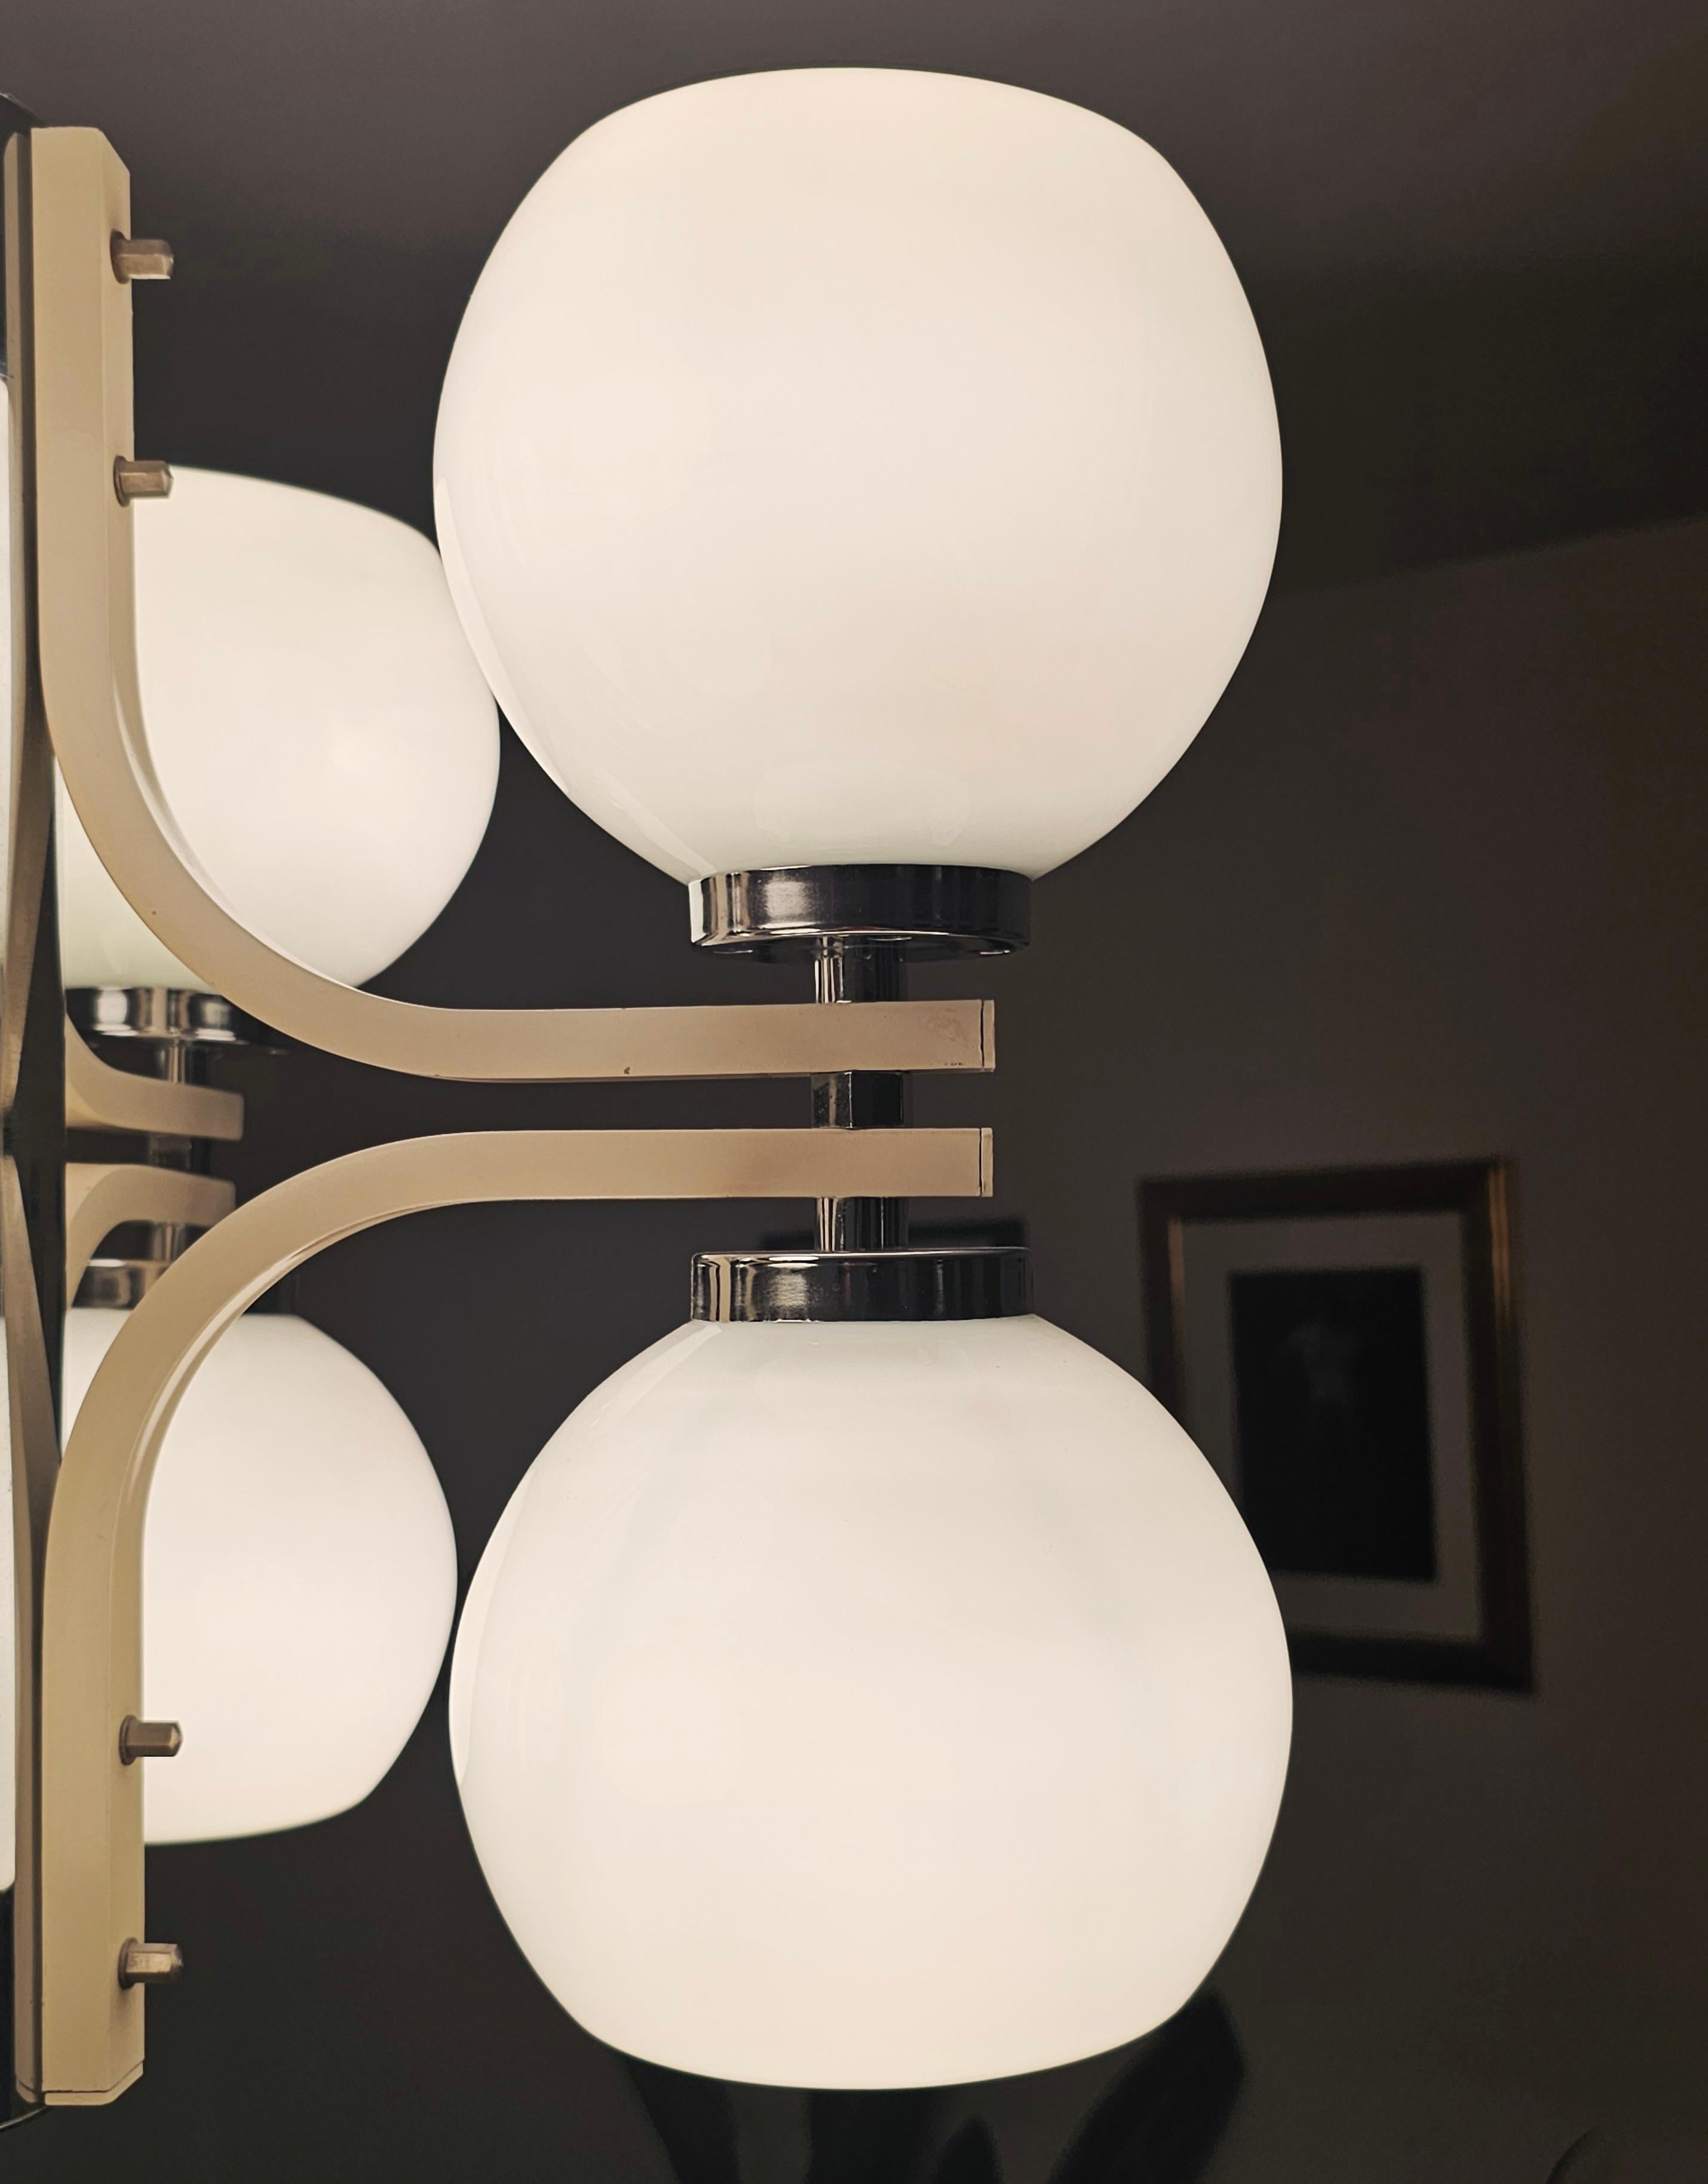 Space Age 8-Light Chandelier with While Glass Shades, Yugoslavia 1970s For Sale 4